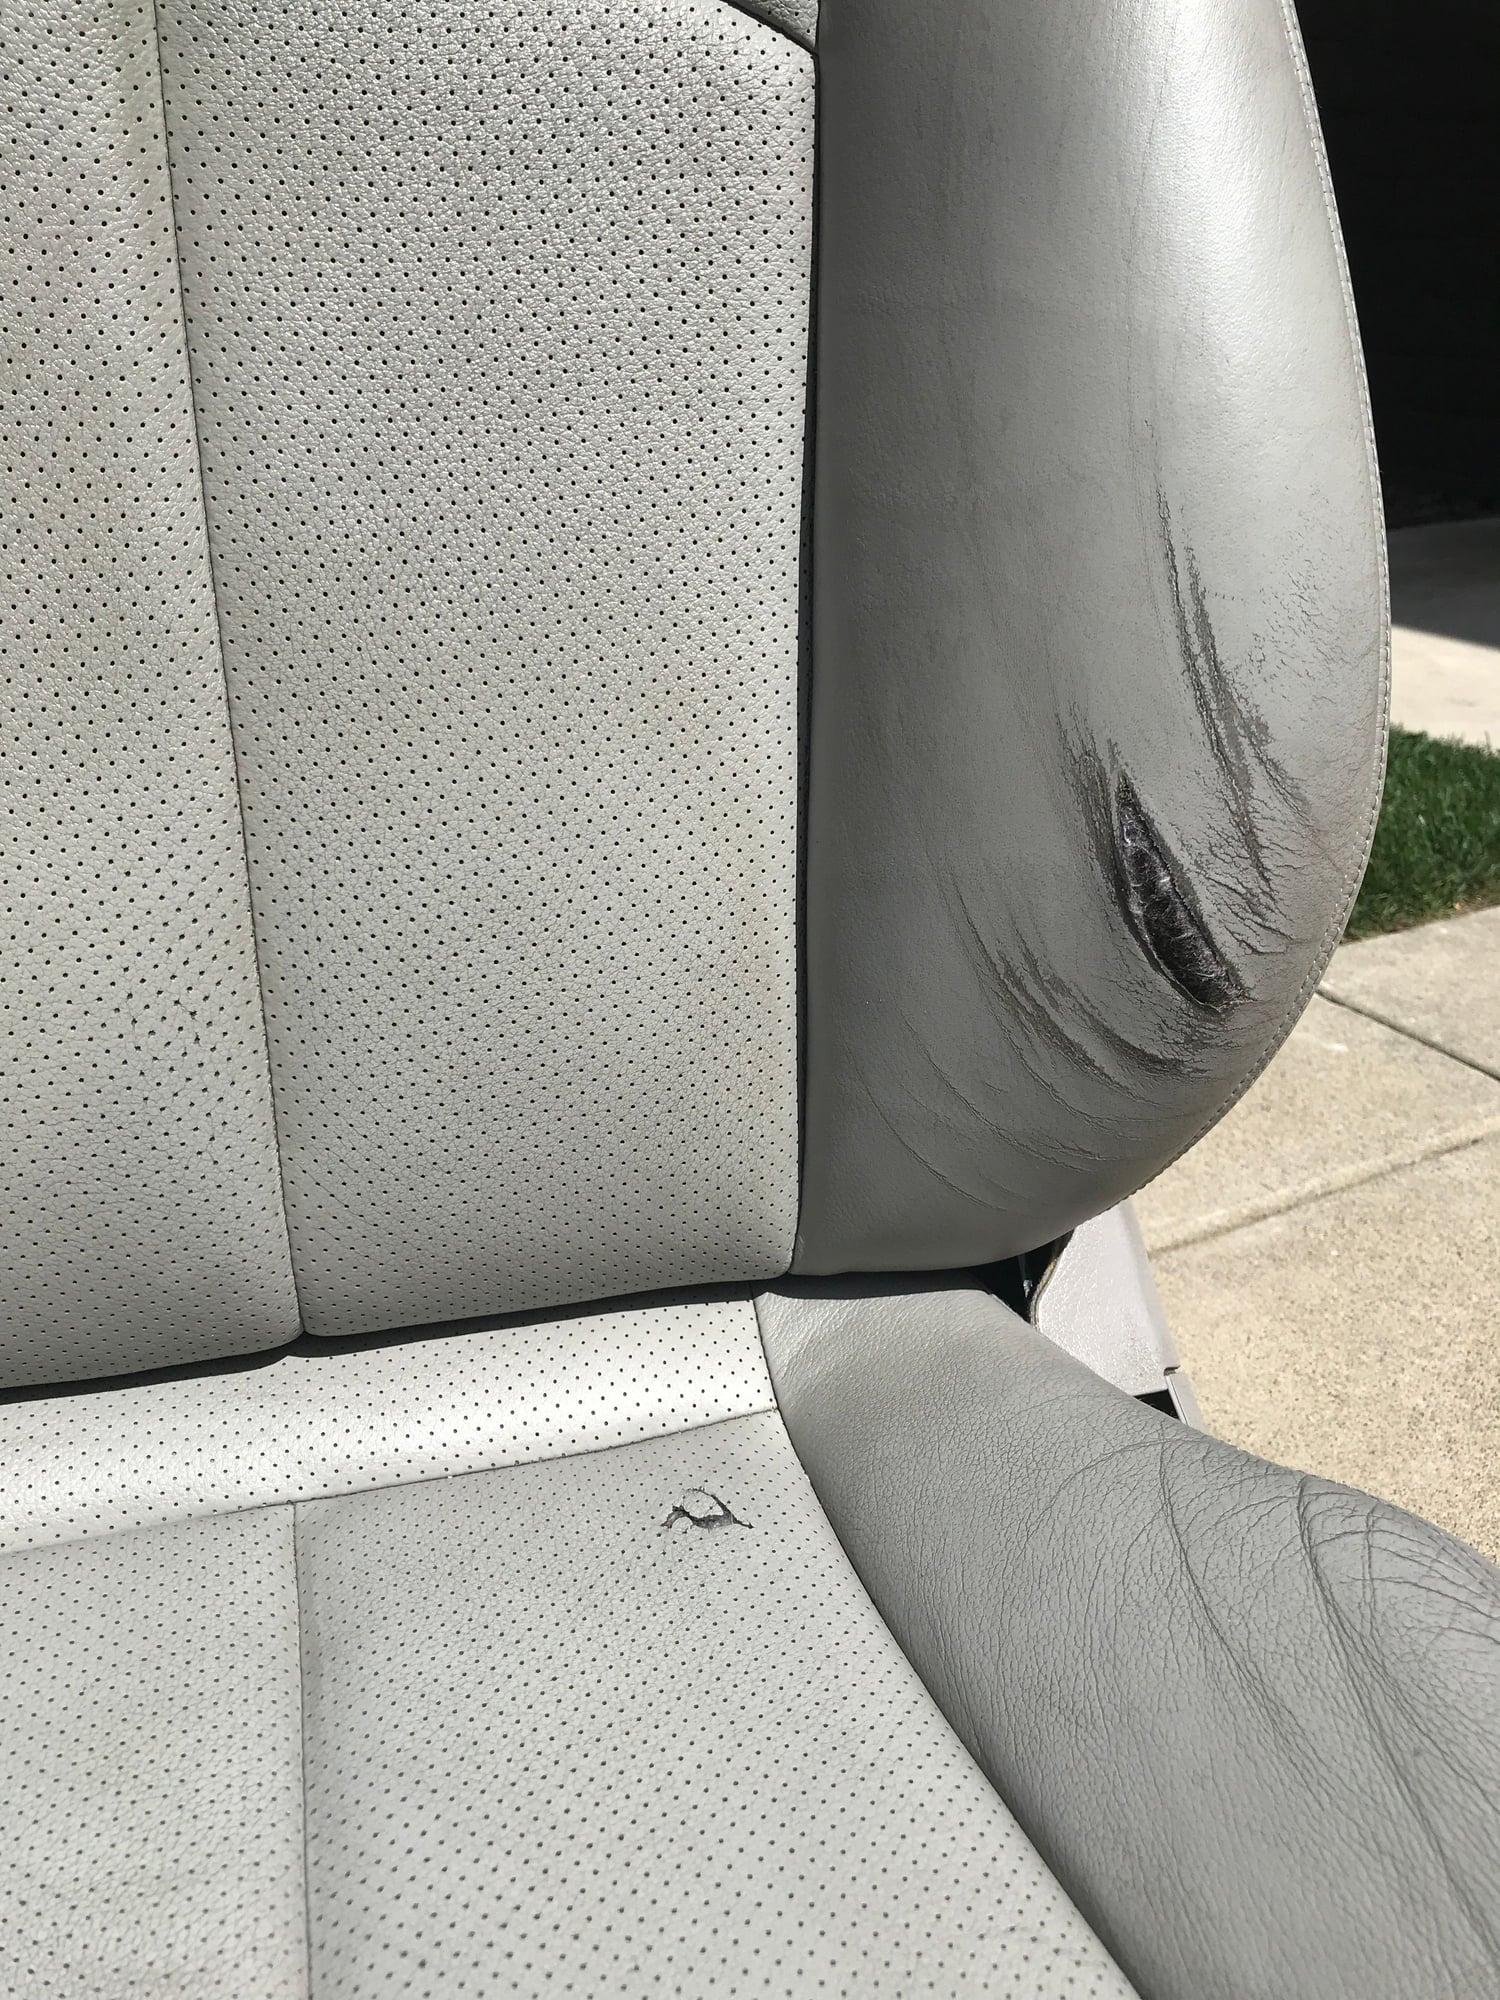 Interior/Upholstery - 2002-05 W211 E500 grey seats - Used - 2002 to 2005 Mercedes-Benz E500 - 2002 to 2005 Mercedes-Benz E320 - Newport Beach, CA 92660, United States